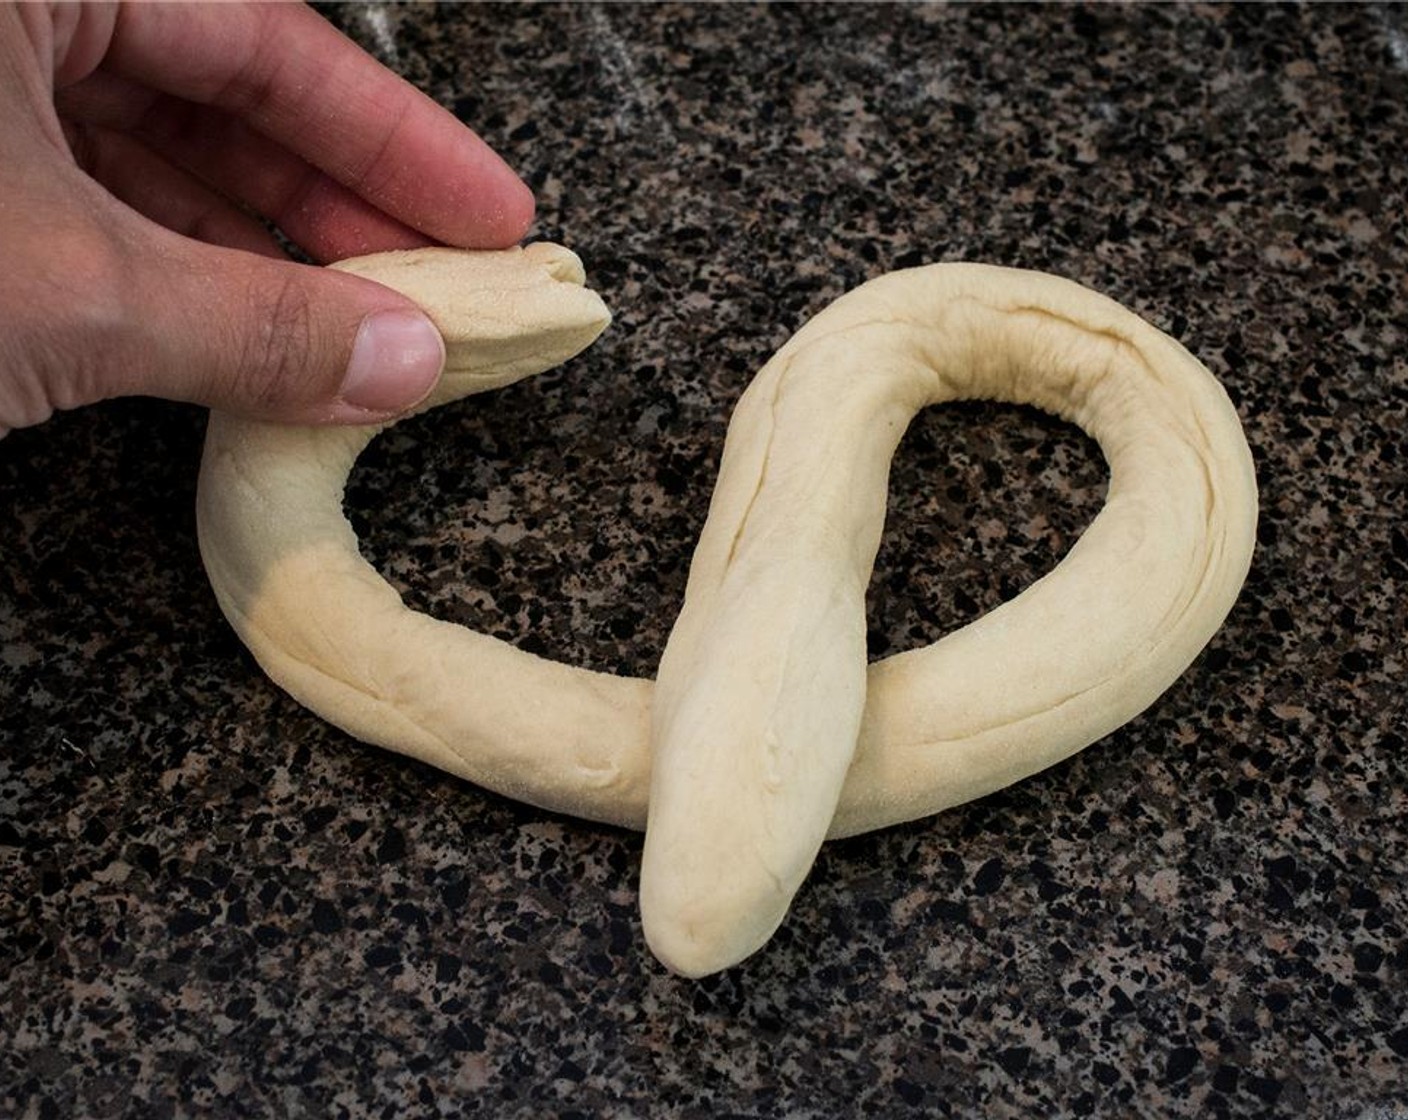 step 9 Take one ball of dough, roll it out into a 22-inch rope using your hands. Making a U-shape with the dough, cross the right side over to the left, and left over to the right. Gently press the ends into the bottom of the U.